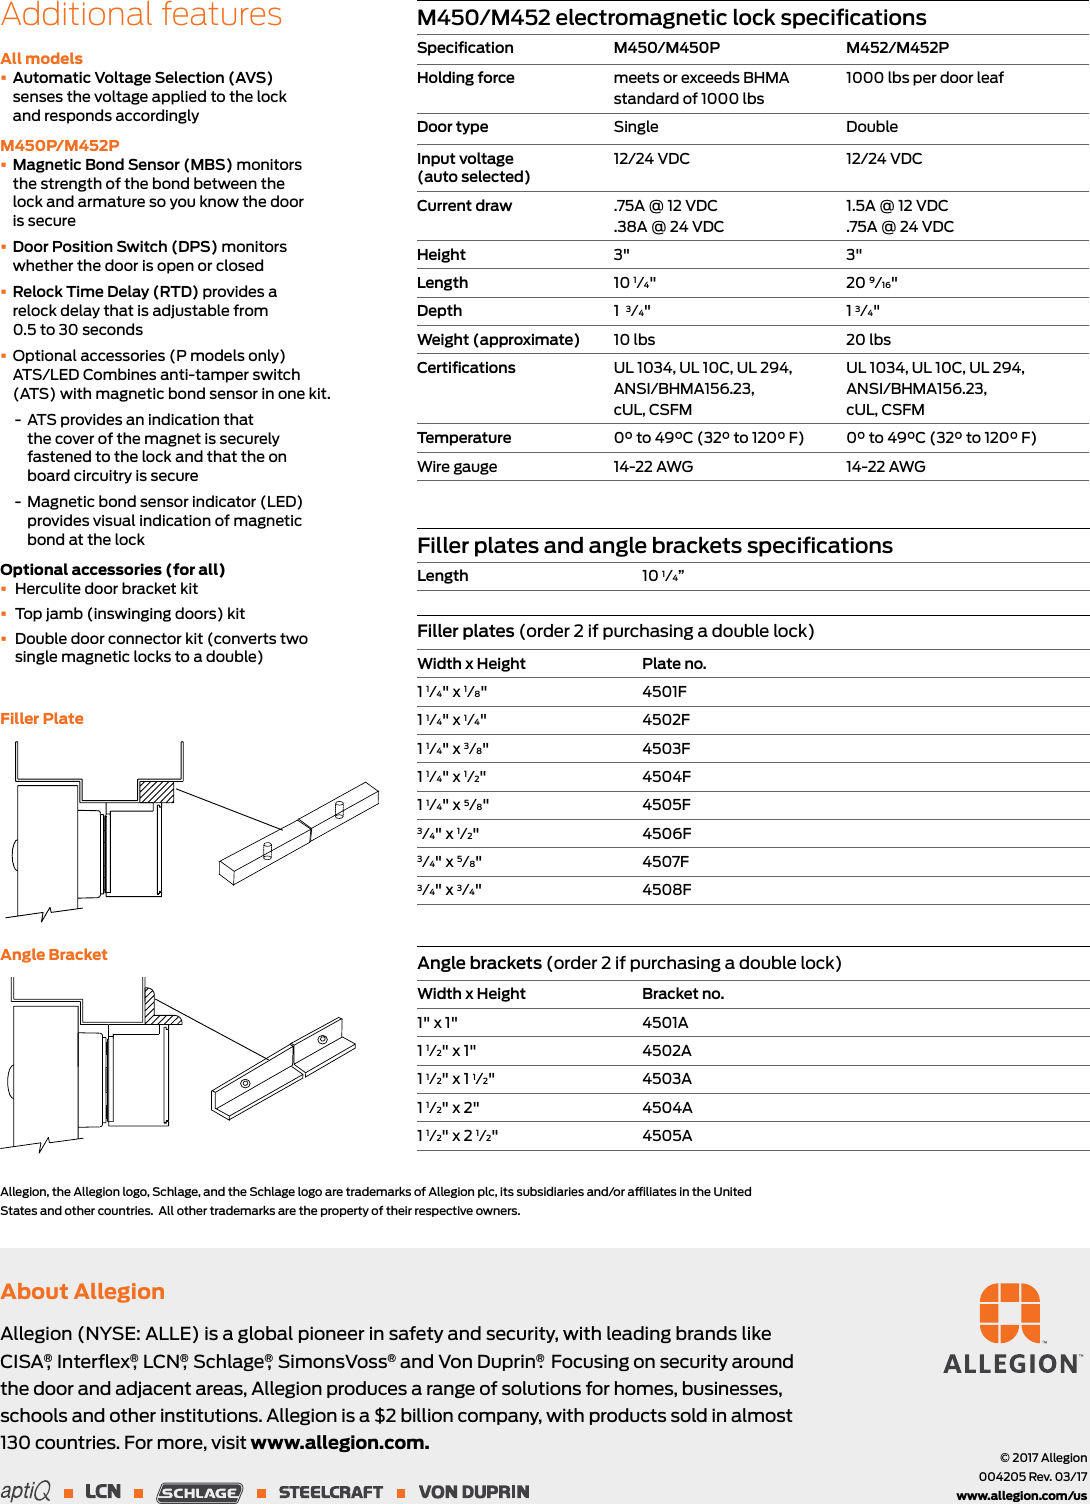 Page 2 of 2 - Schlage Electronics M450 M452 Electromagnetic Locks Data Sheet M450/452 High Security Series Lock 104205